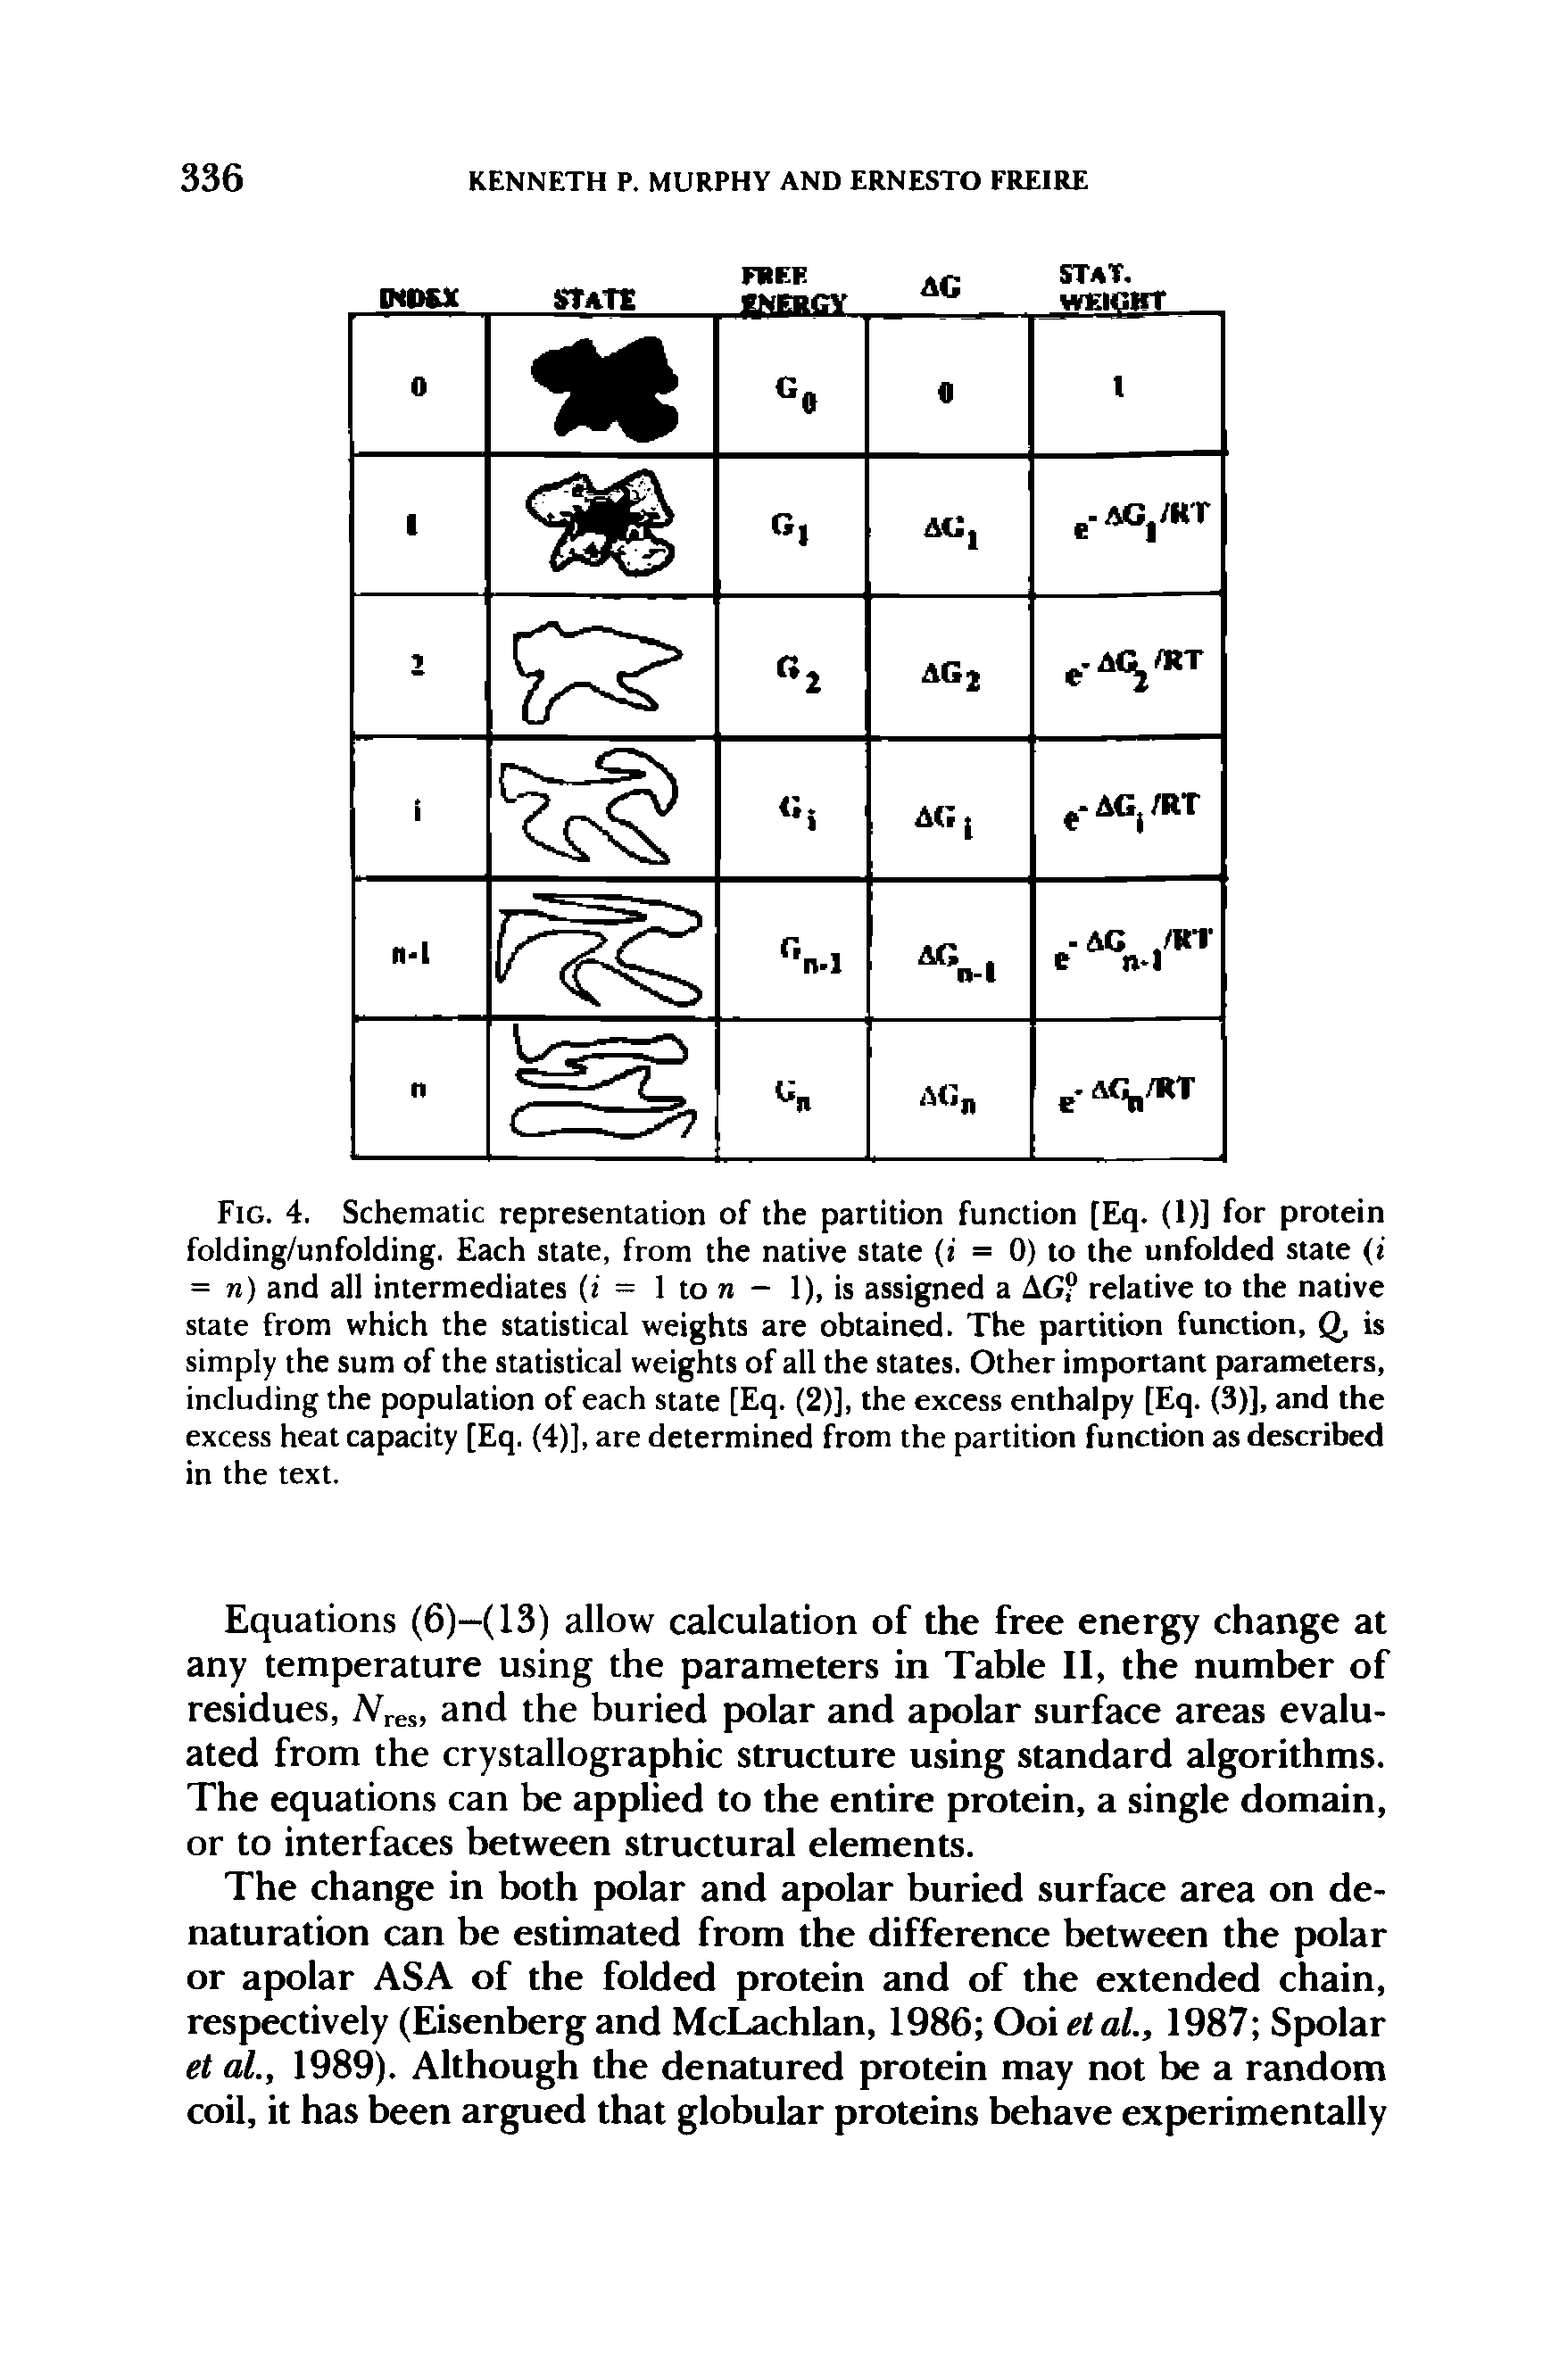 Fig. 4. Schematic representation of the partition function [Eq. (1)] for protein folding/unfolding. Each state, from the native state (i = 0) to the unfolded state (i = n) and all intermediates (i = 1 to n - 1), is assigned a AG relative to the native state from which the statistical weights are obtained. The partition function, Q, is simply the sum of the statistical weights of all the states. Other important parameters, including the population of each state [Eq. (2)], the excess enthalpy [Eq. (3)], and the excess heat capacity [Eq. (4)], are determined from the partition function as described in the text.